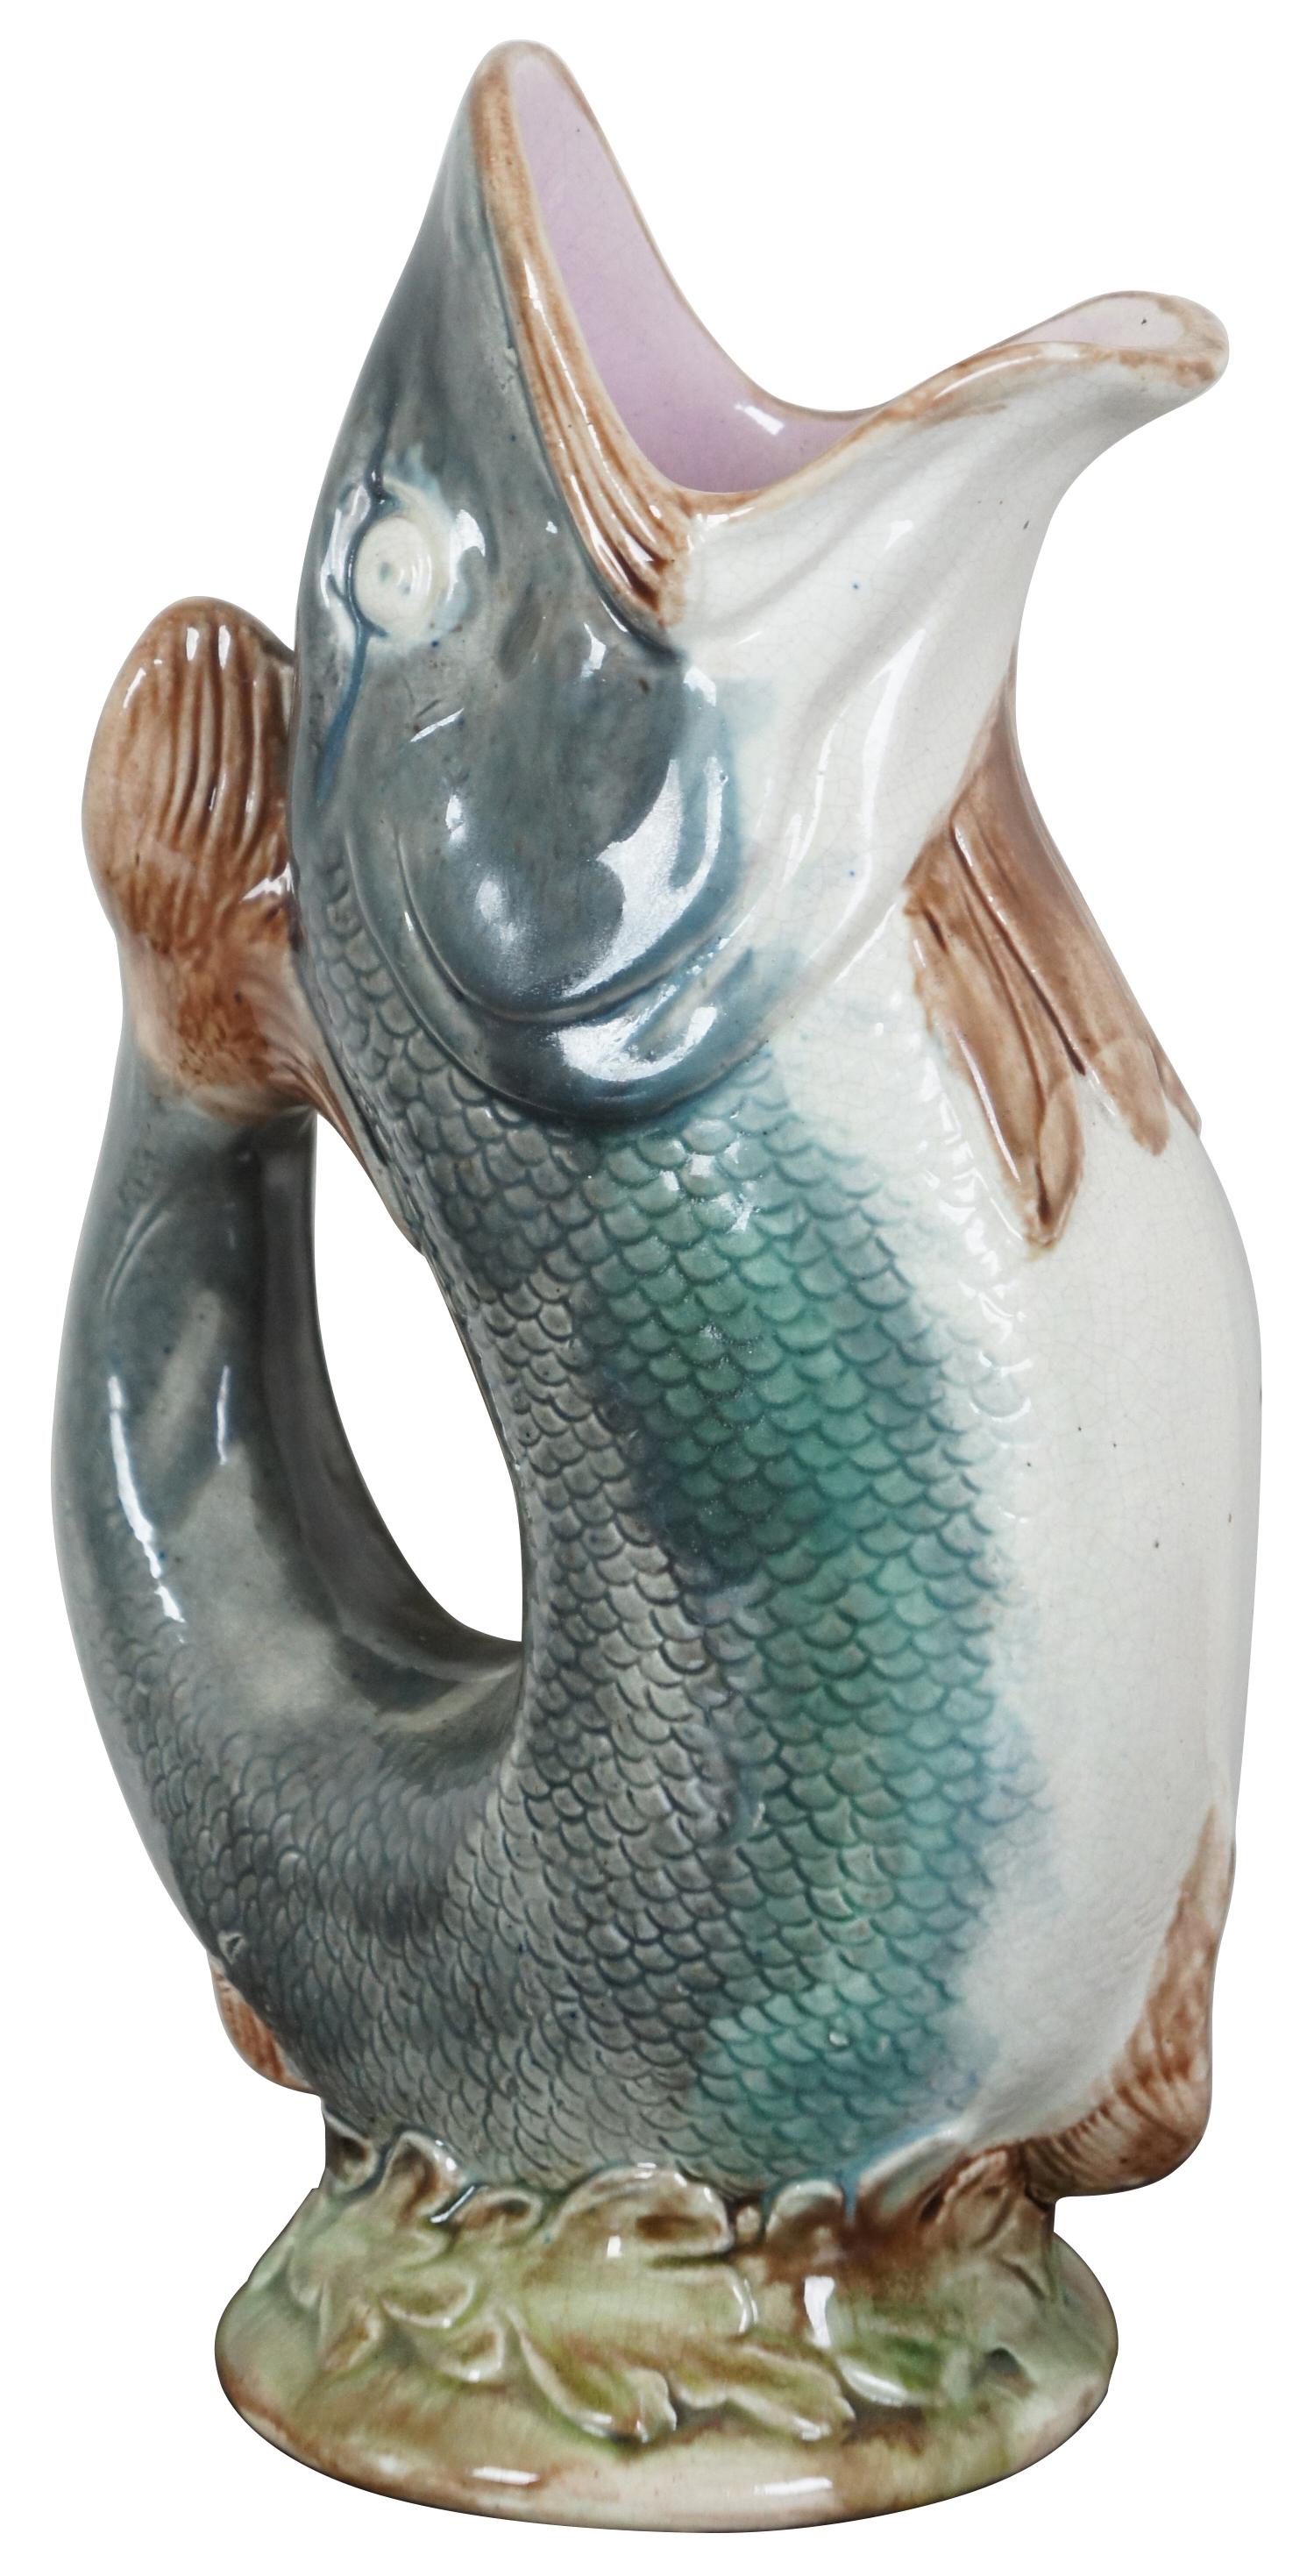 Antique Majolica porcelain vase shaped like a gray, green and white fish balanced upright on its tail. Gurgles when you pour. Measure: 11'.